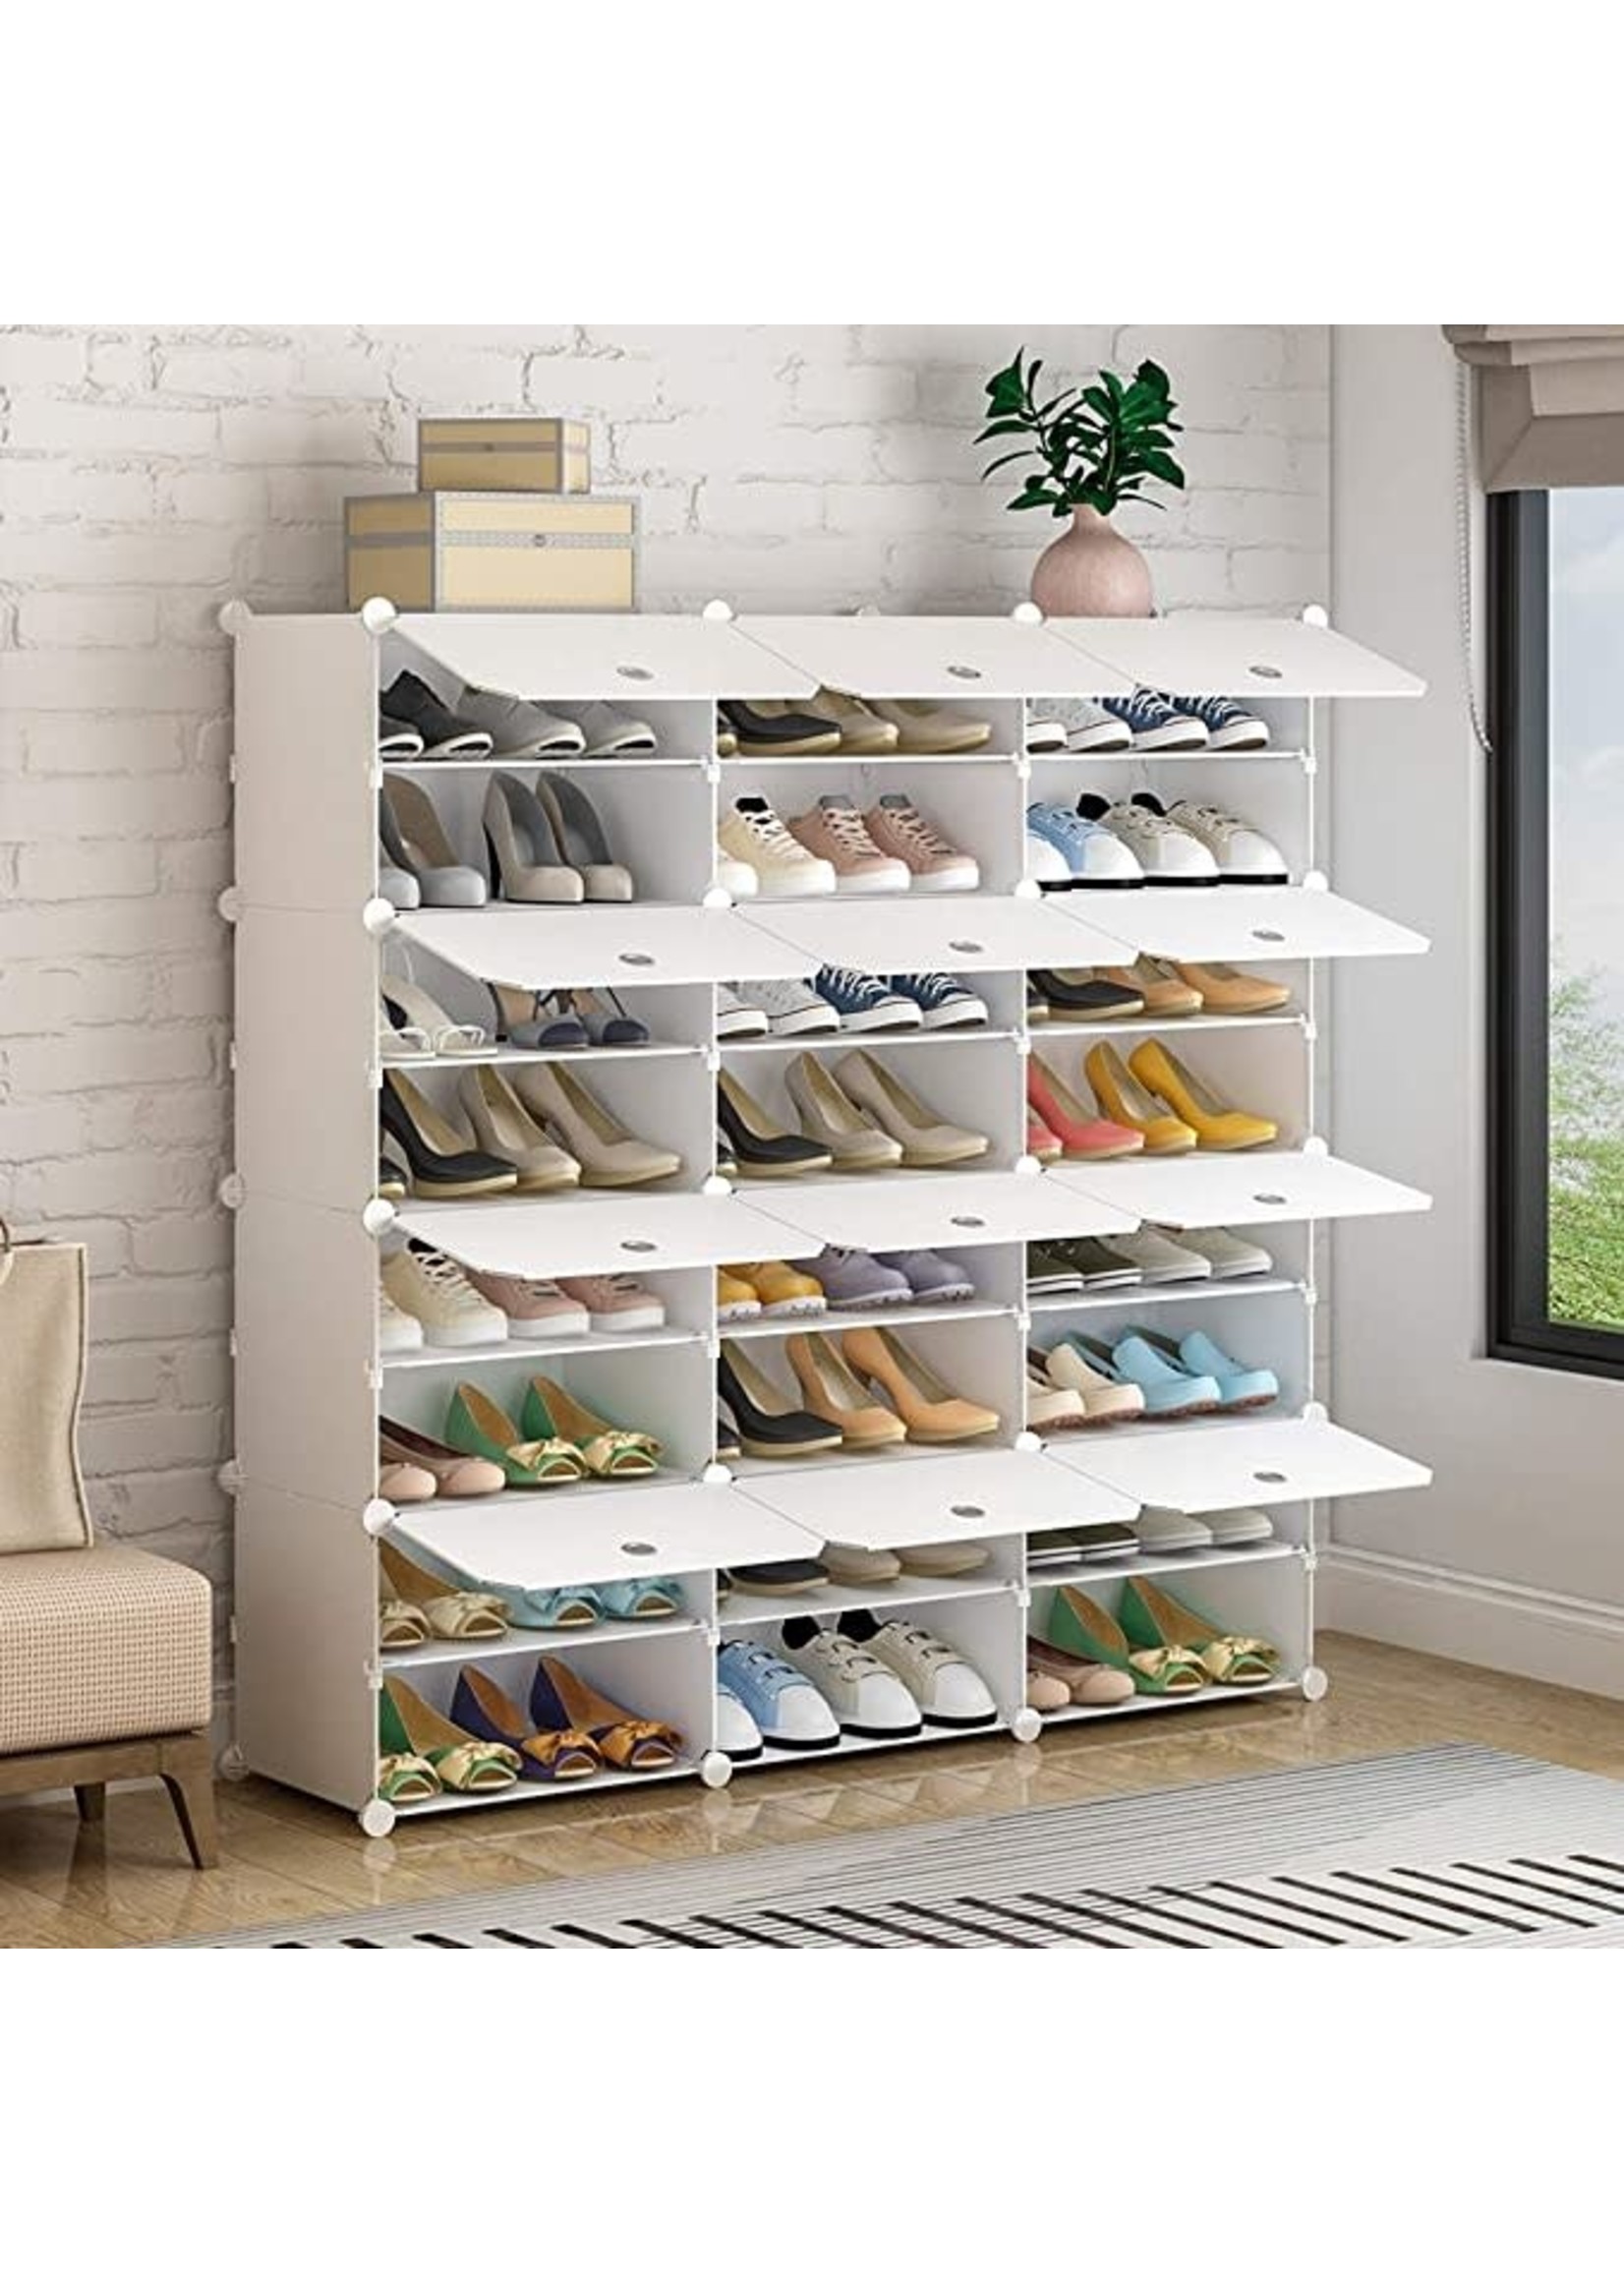 KOUSI Portable Shoe Rack Organizer 24 Grids Tower Shelf Storage Cabinet  Stand Expandable for Heels, Boots, Slippers, White - D3 Surplus Outlet